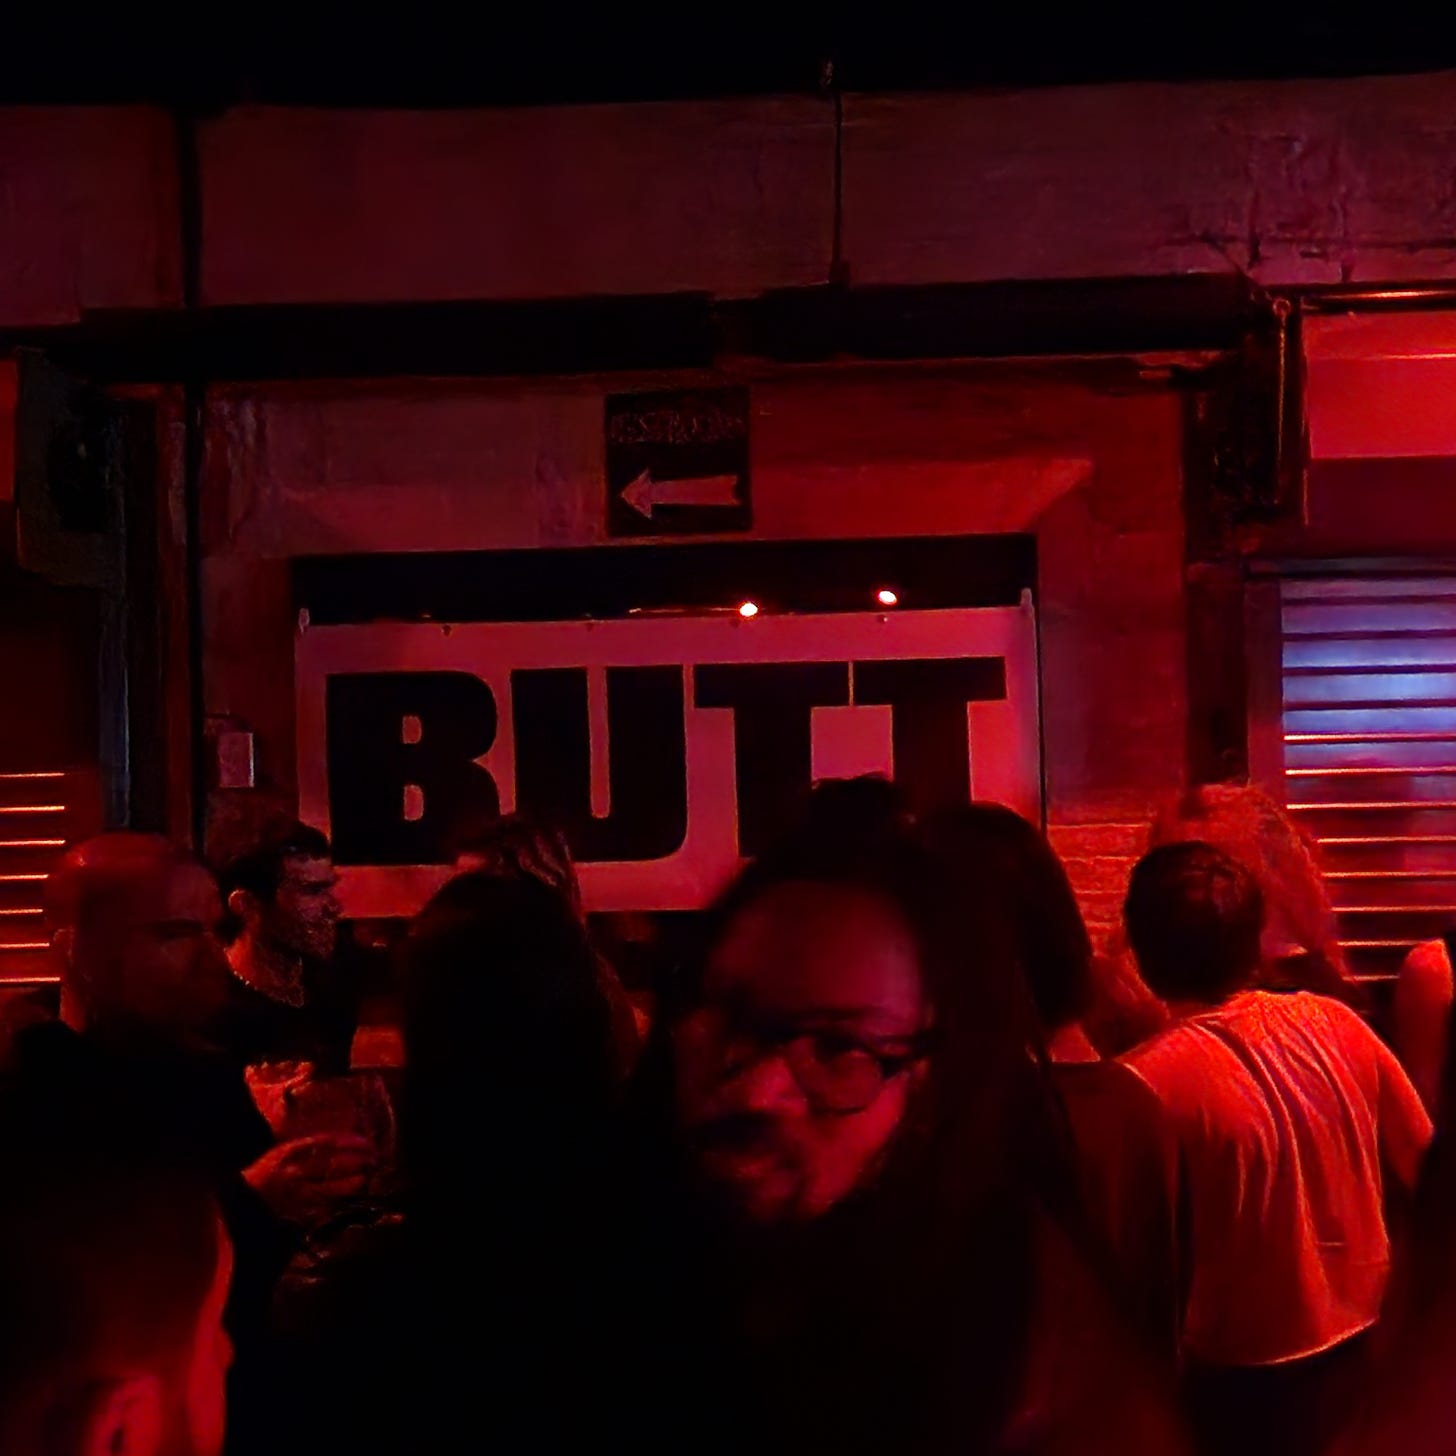 The image captures a crowded party atmosphere with warm red lighting, typical of a club setting. In the background, there's a prominent sign with the word 'BUTT' illuminated, indicating the theme or title of the event. Foreground shows silhouettes and partial views of attendees in casual party wear, engaged in conversation and socializing.